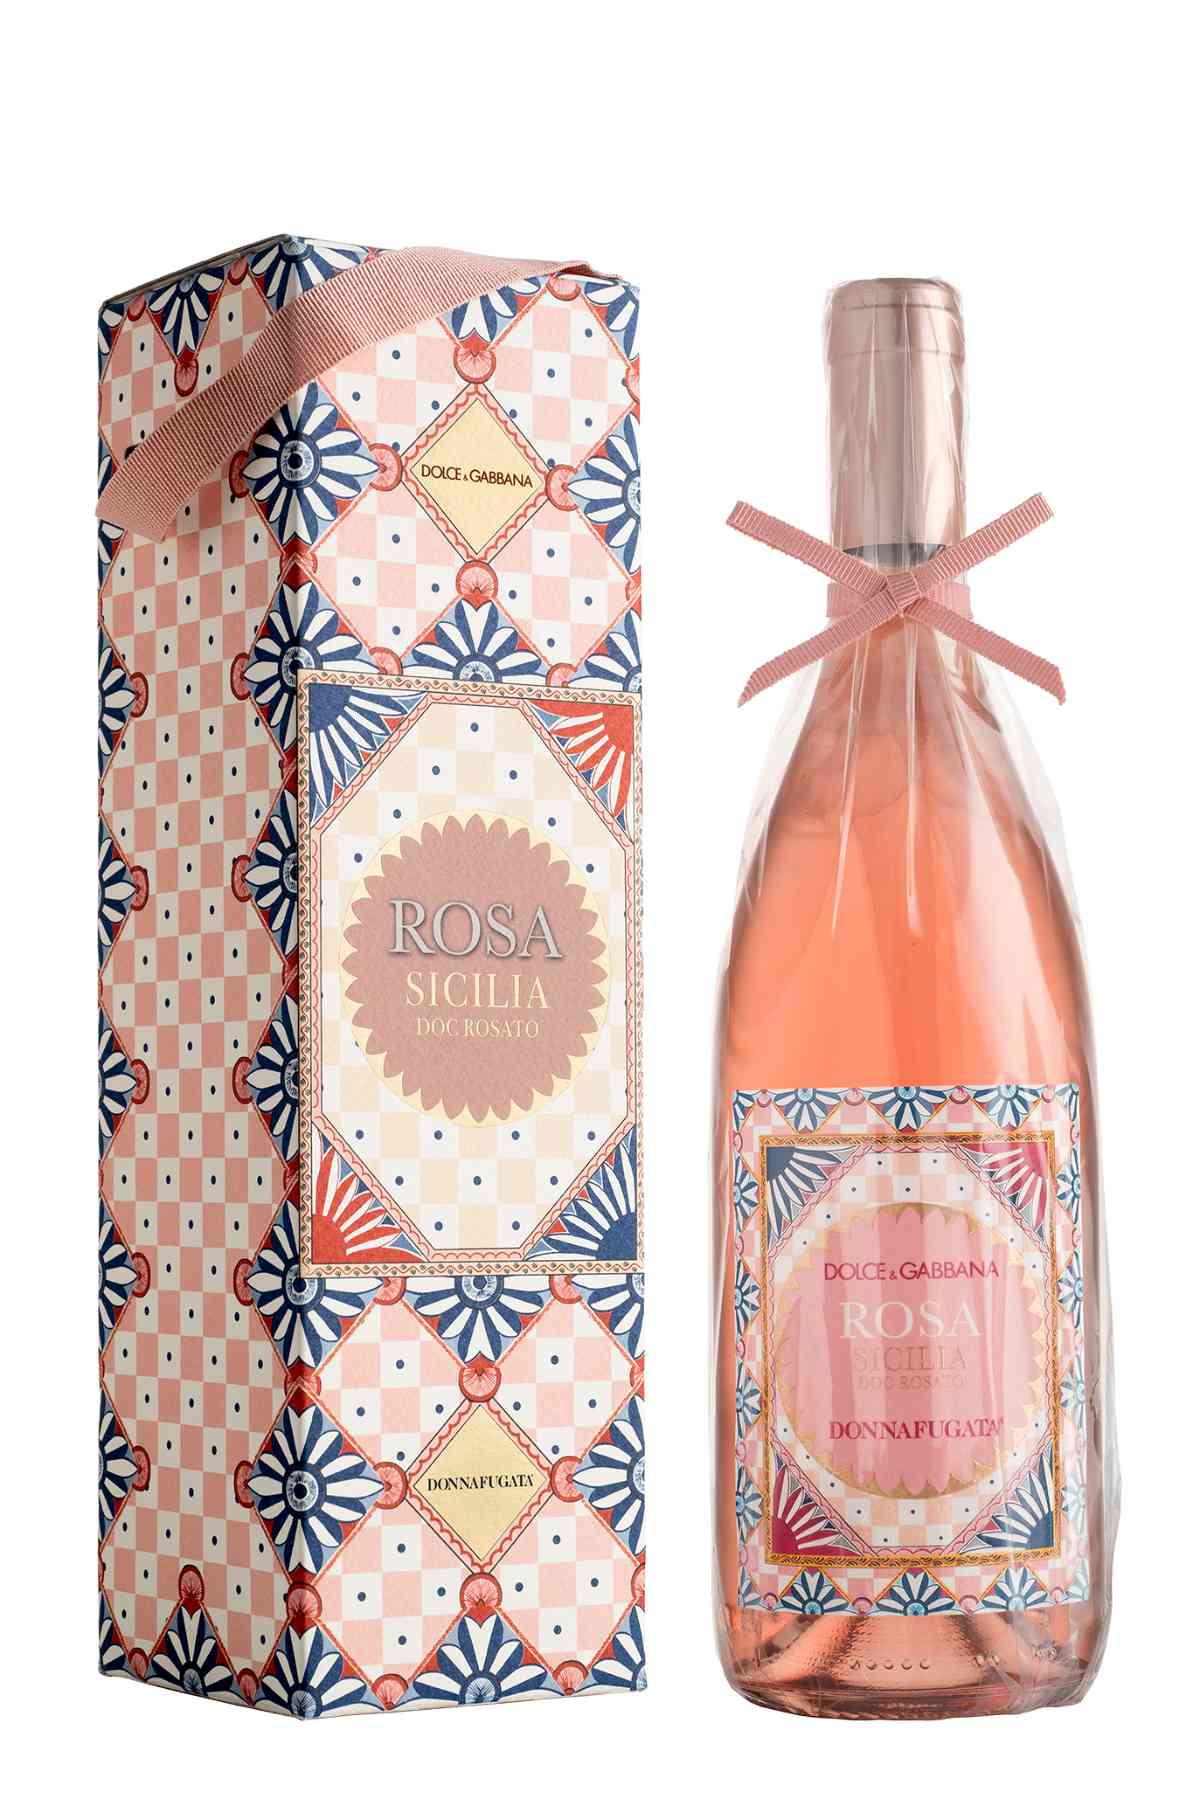 It’s Time For Rosa, The Rosé Wine by Dolce & Gabbana And Donnafugata